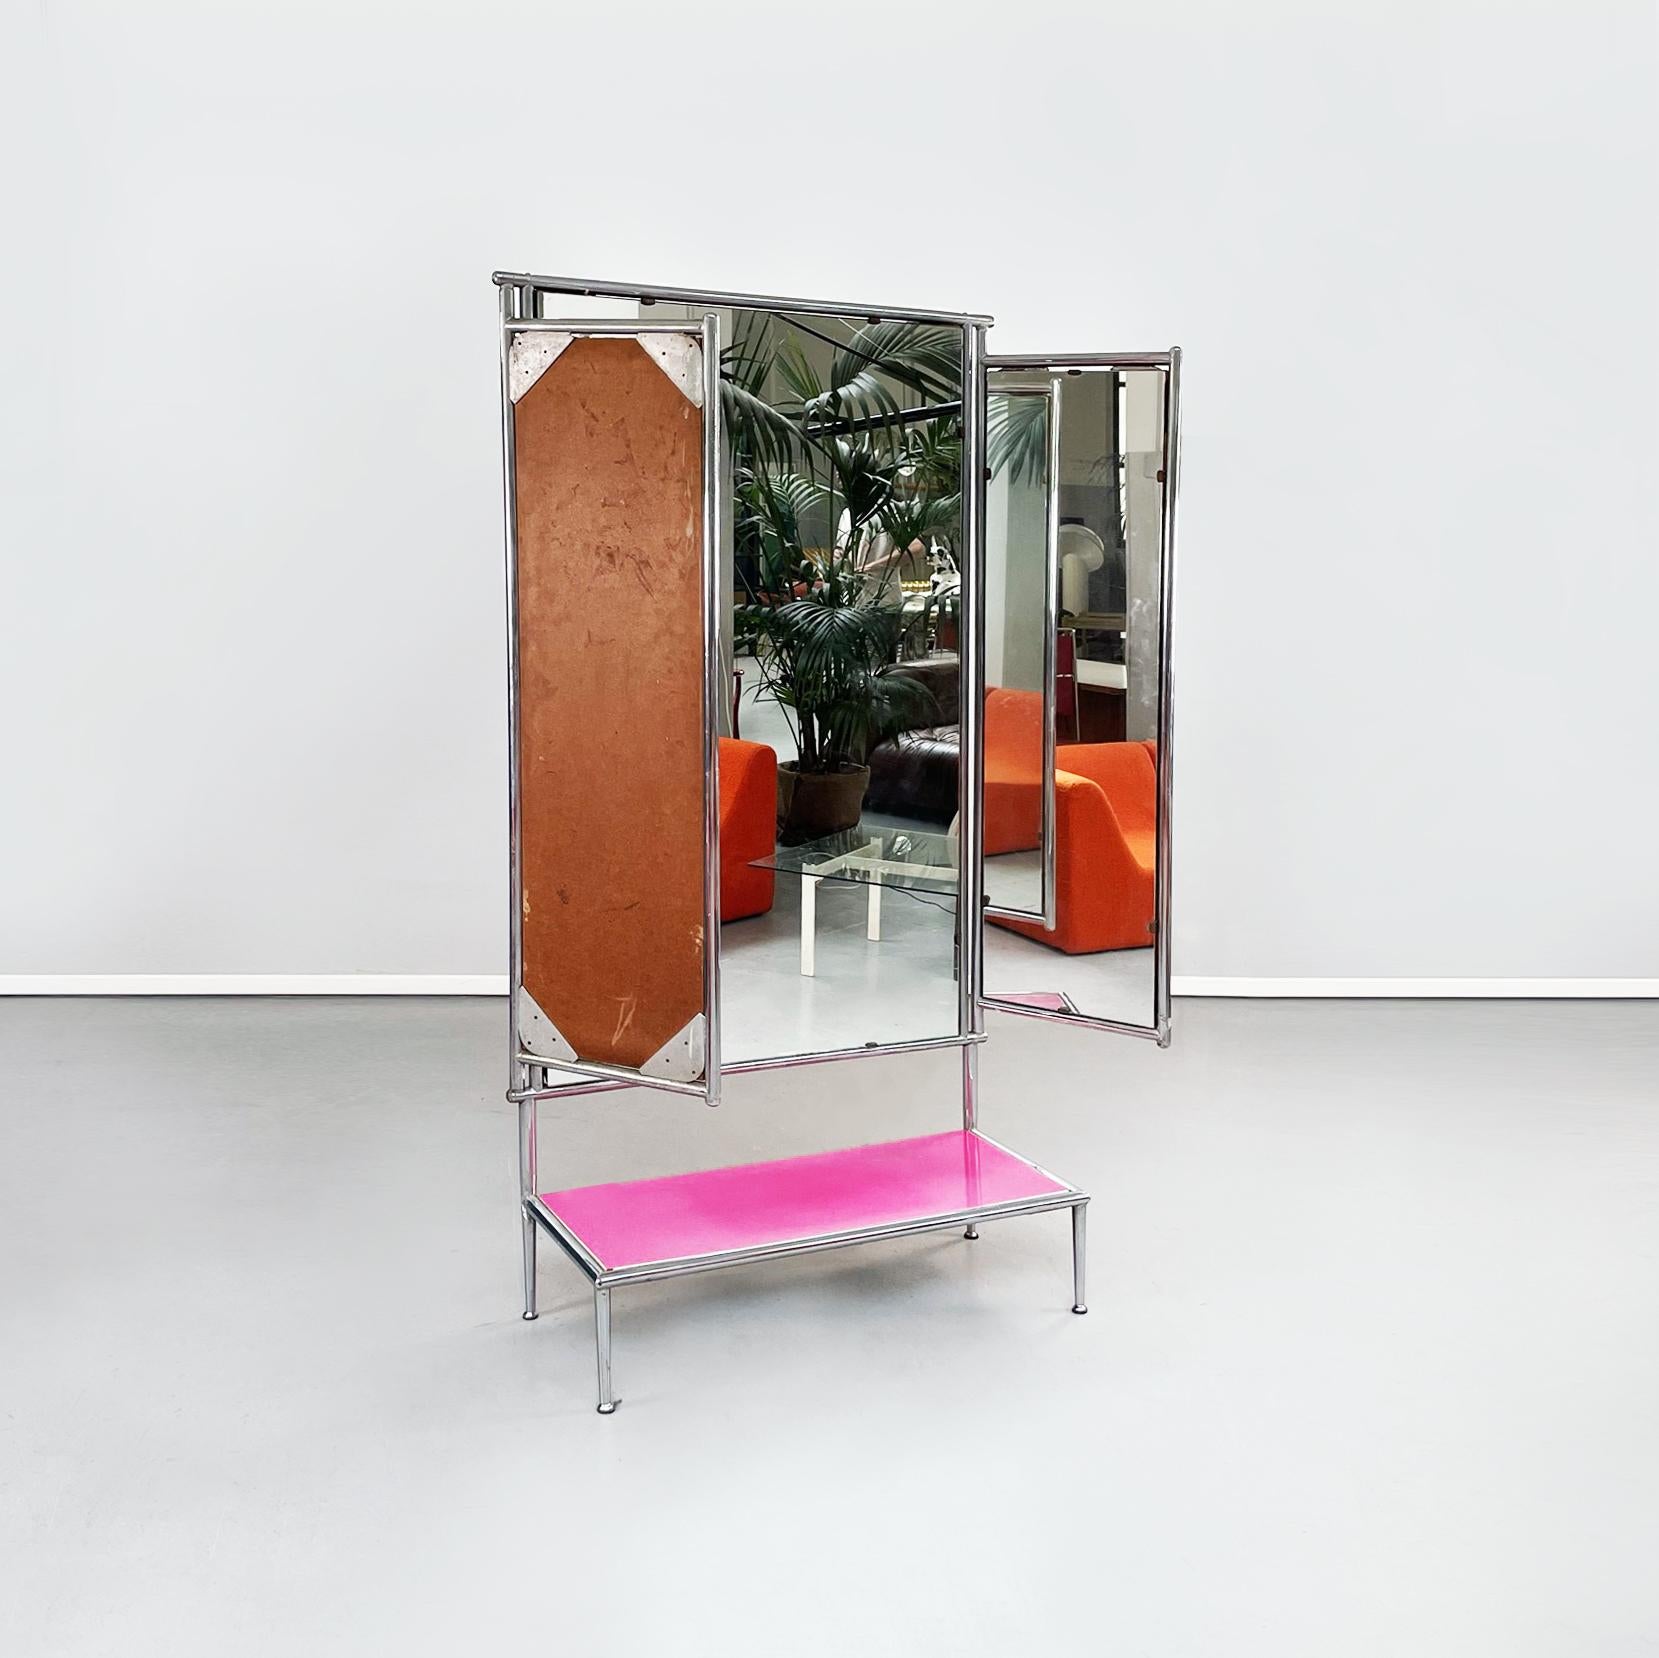 Italian modern Pink wooden and tubular metal floor mirror with 3 doors, 1980s
Floor mirror with 3 doors in metal. The three doors have a tubular structure with a wooden back. Tilting side doors can be closed thanks to the hinges. There is a